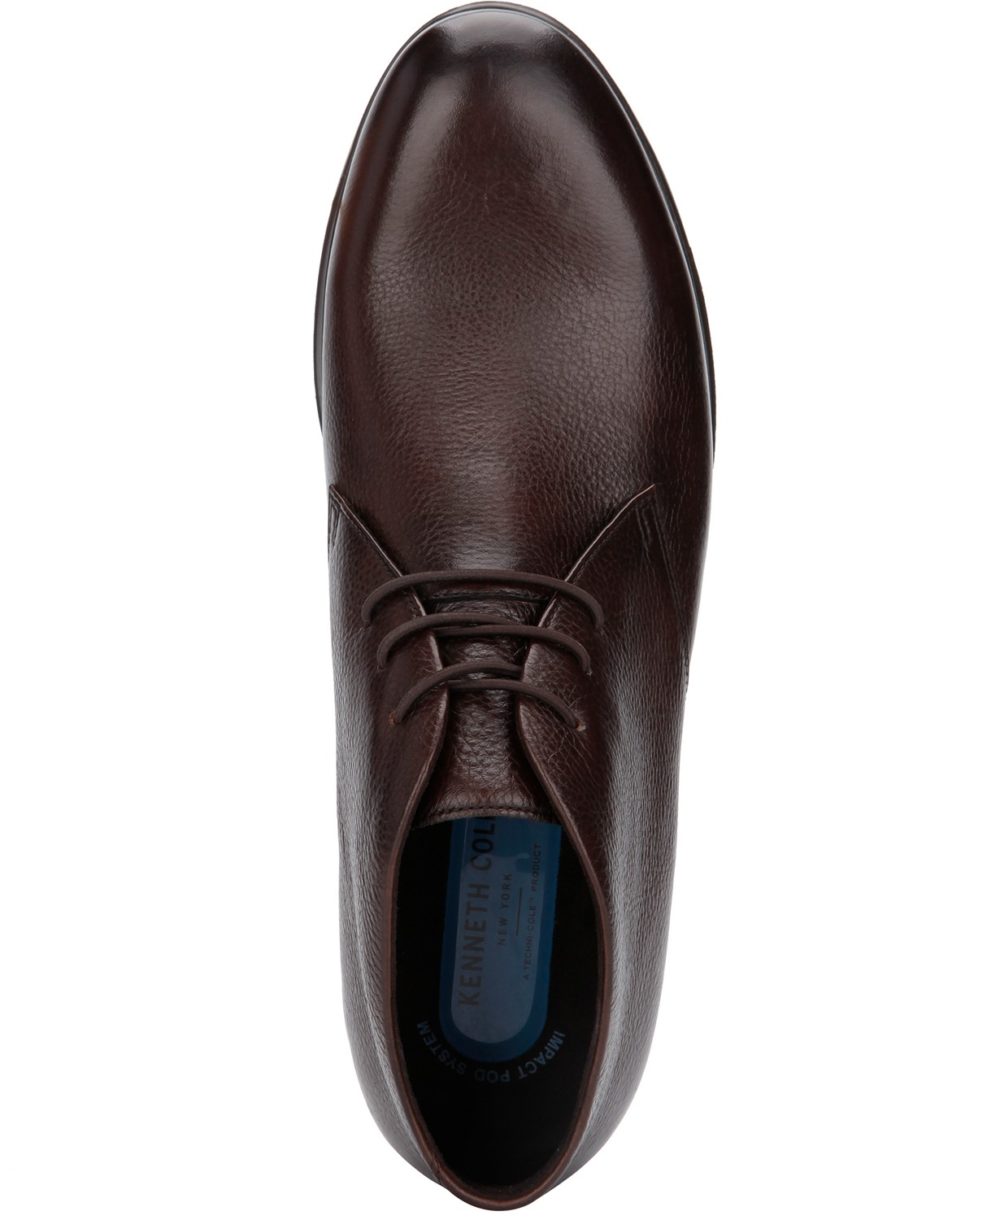 woocommerce-673321-2209615.cloudwaysapps.com-kenneth-cole-new-york-mens-brown-leather-rocketpod-chukka-boots